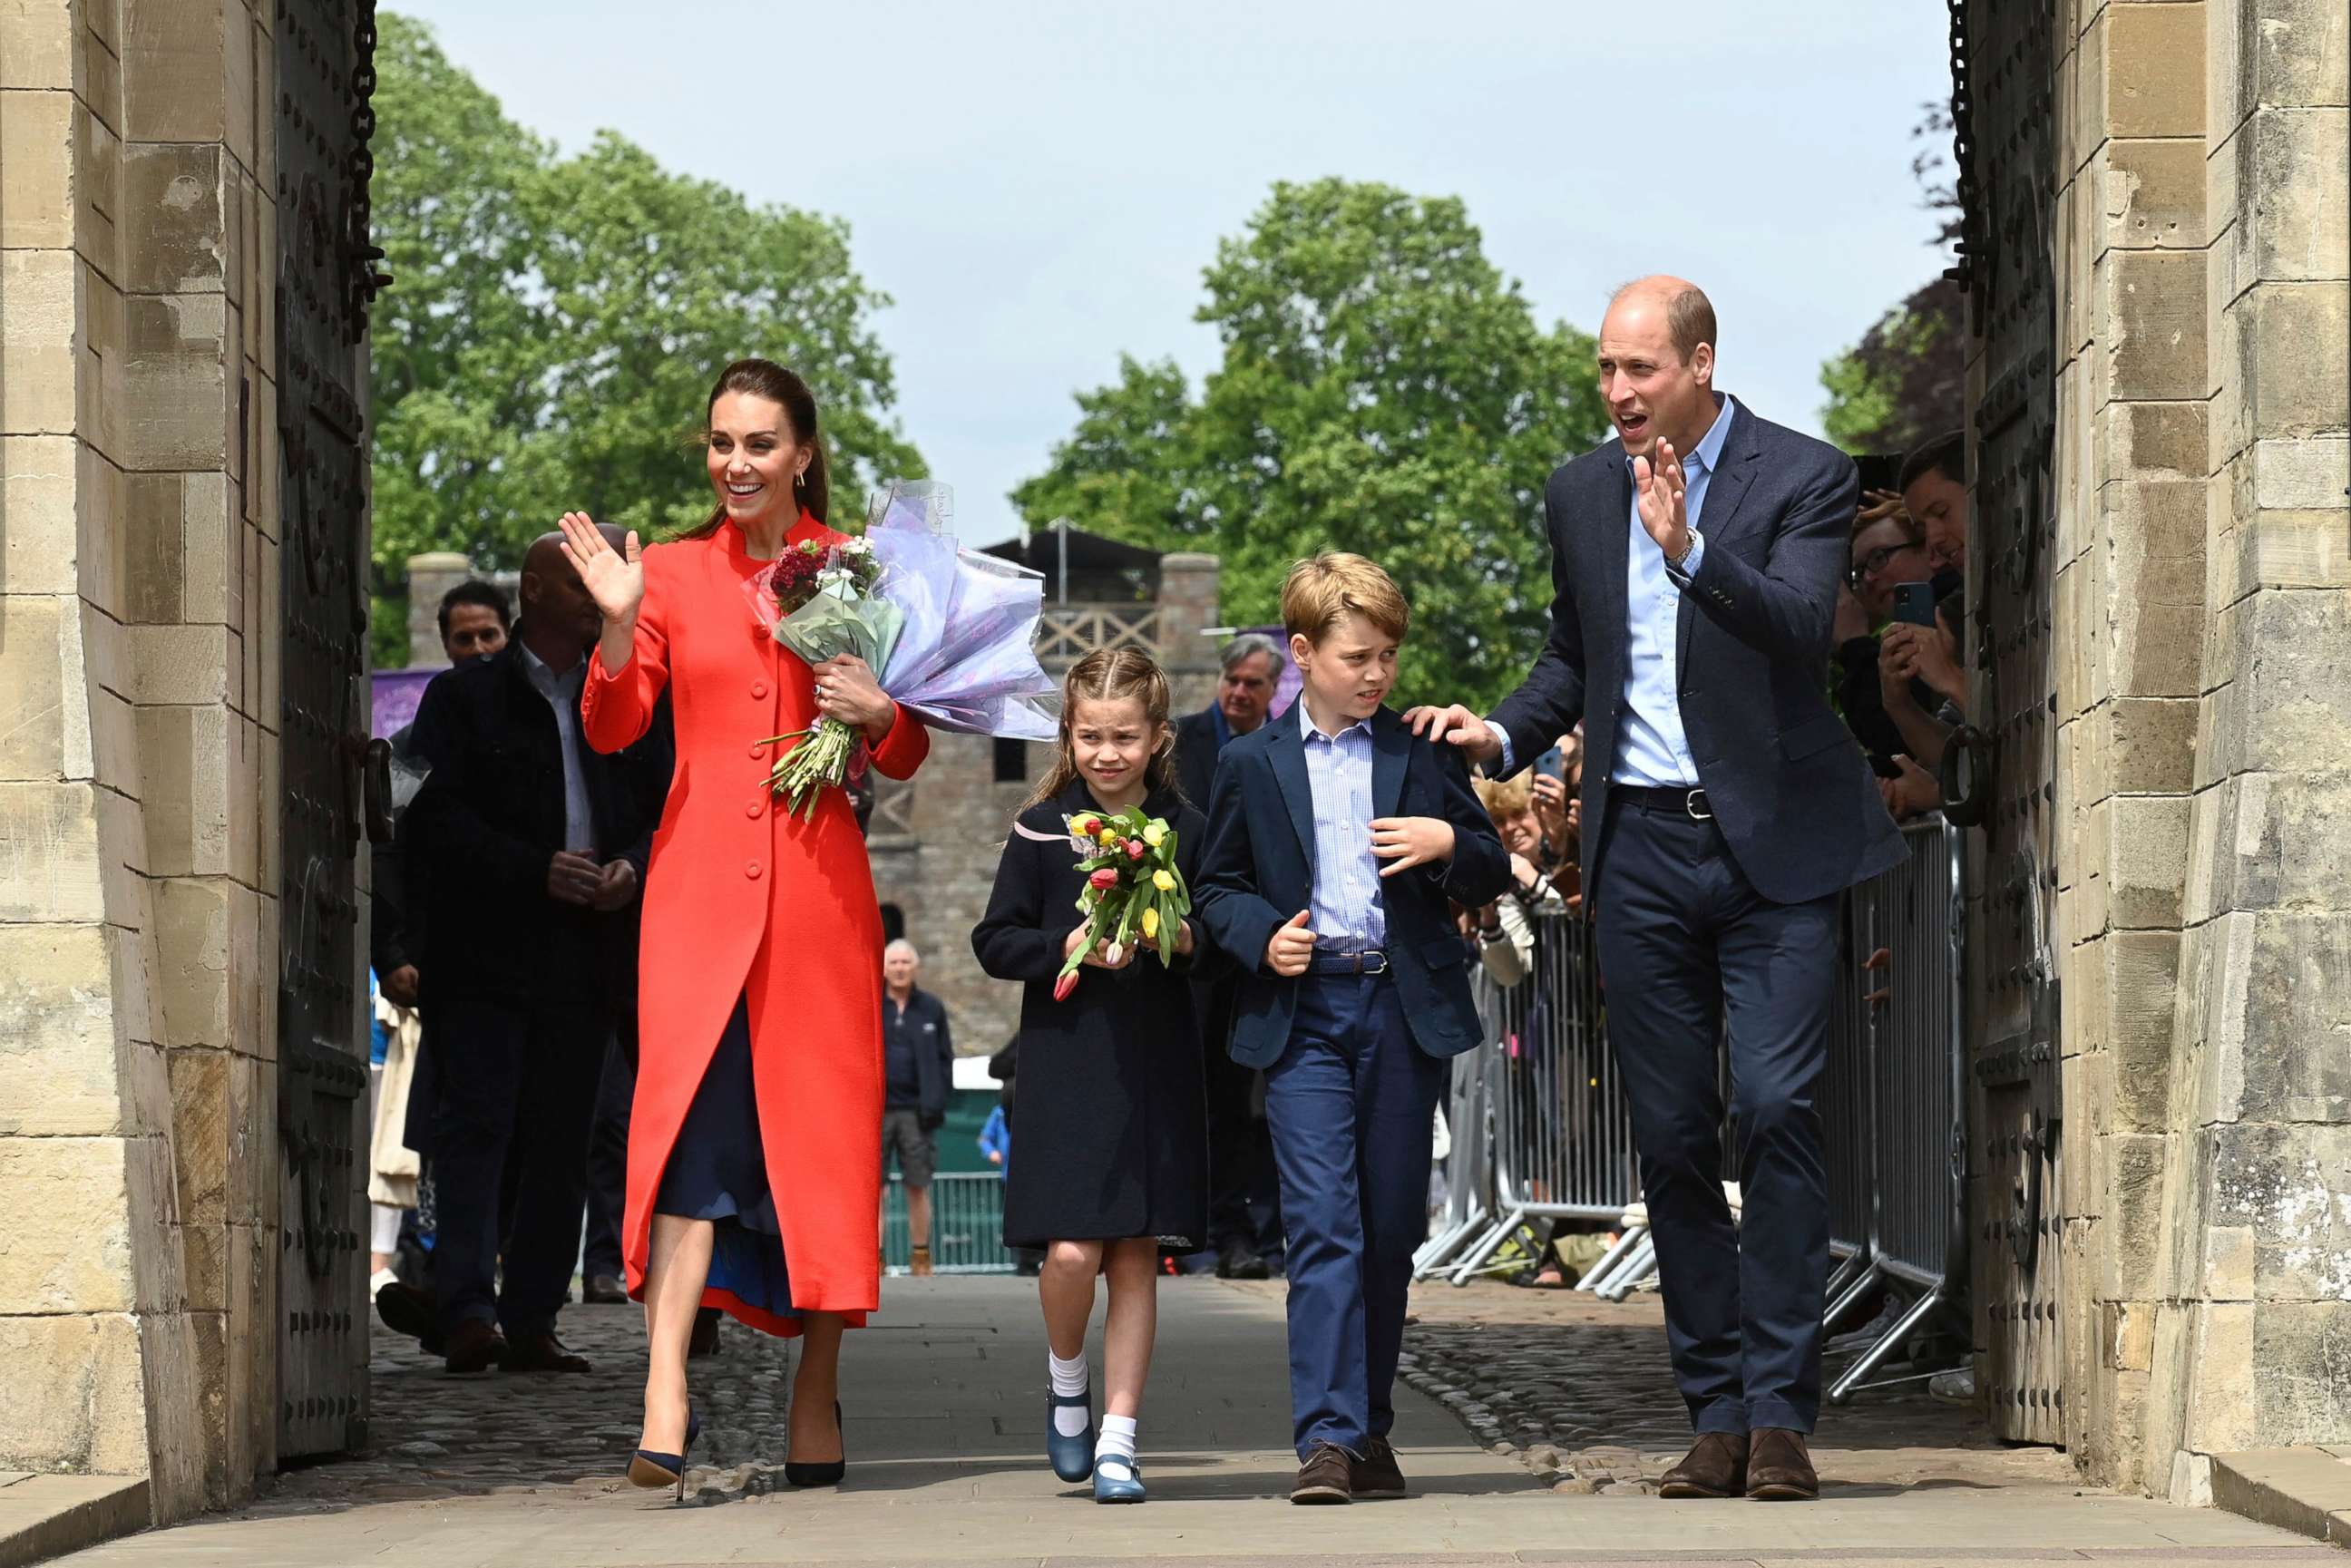 PHOTO: Kate, Duchess of Cambridge, Princess Charlotte, Prince George and Prince William during their visit to Cardiff Castle, June 4, 2022.